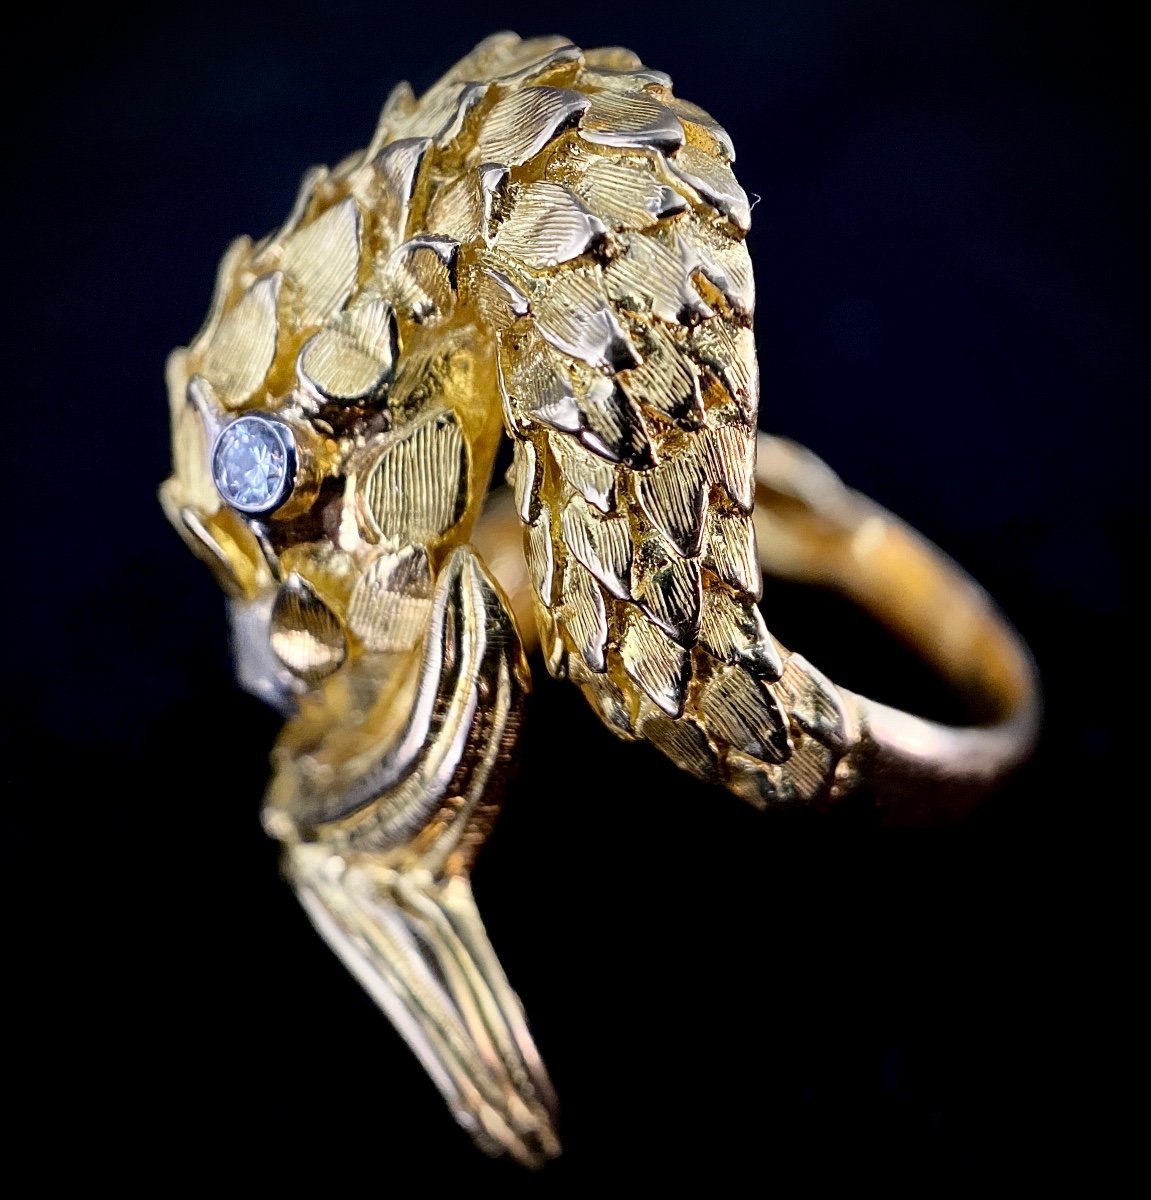 Chiseled Yellow Gold Ring In The Shape Of A Crocodile With Diamond Of 0.35 Carat + 0.10 Carat